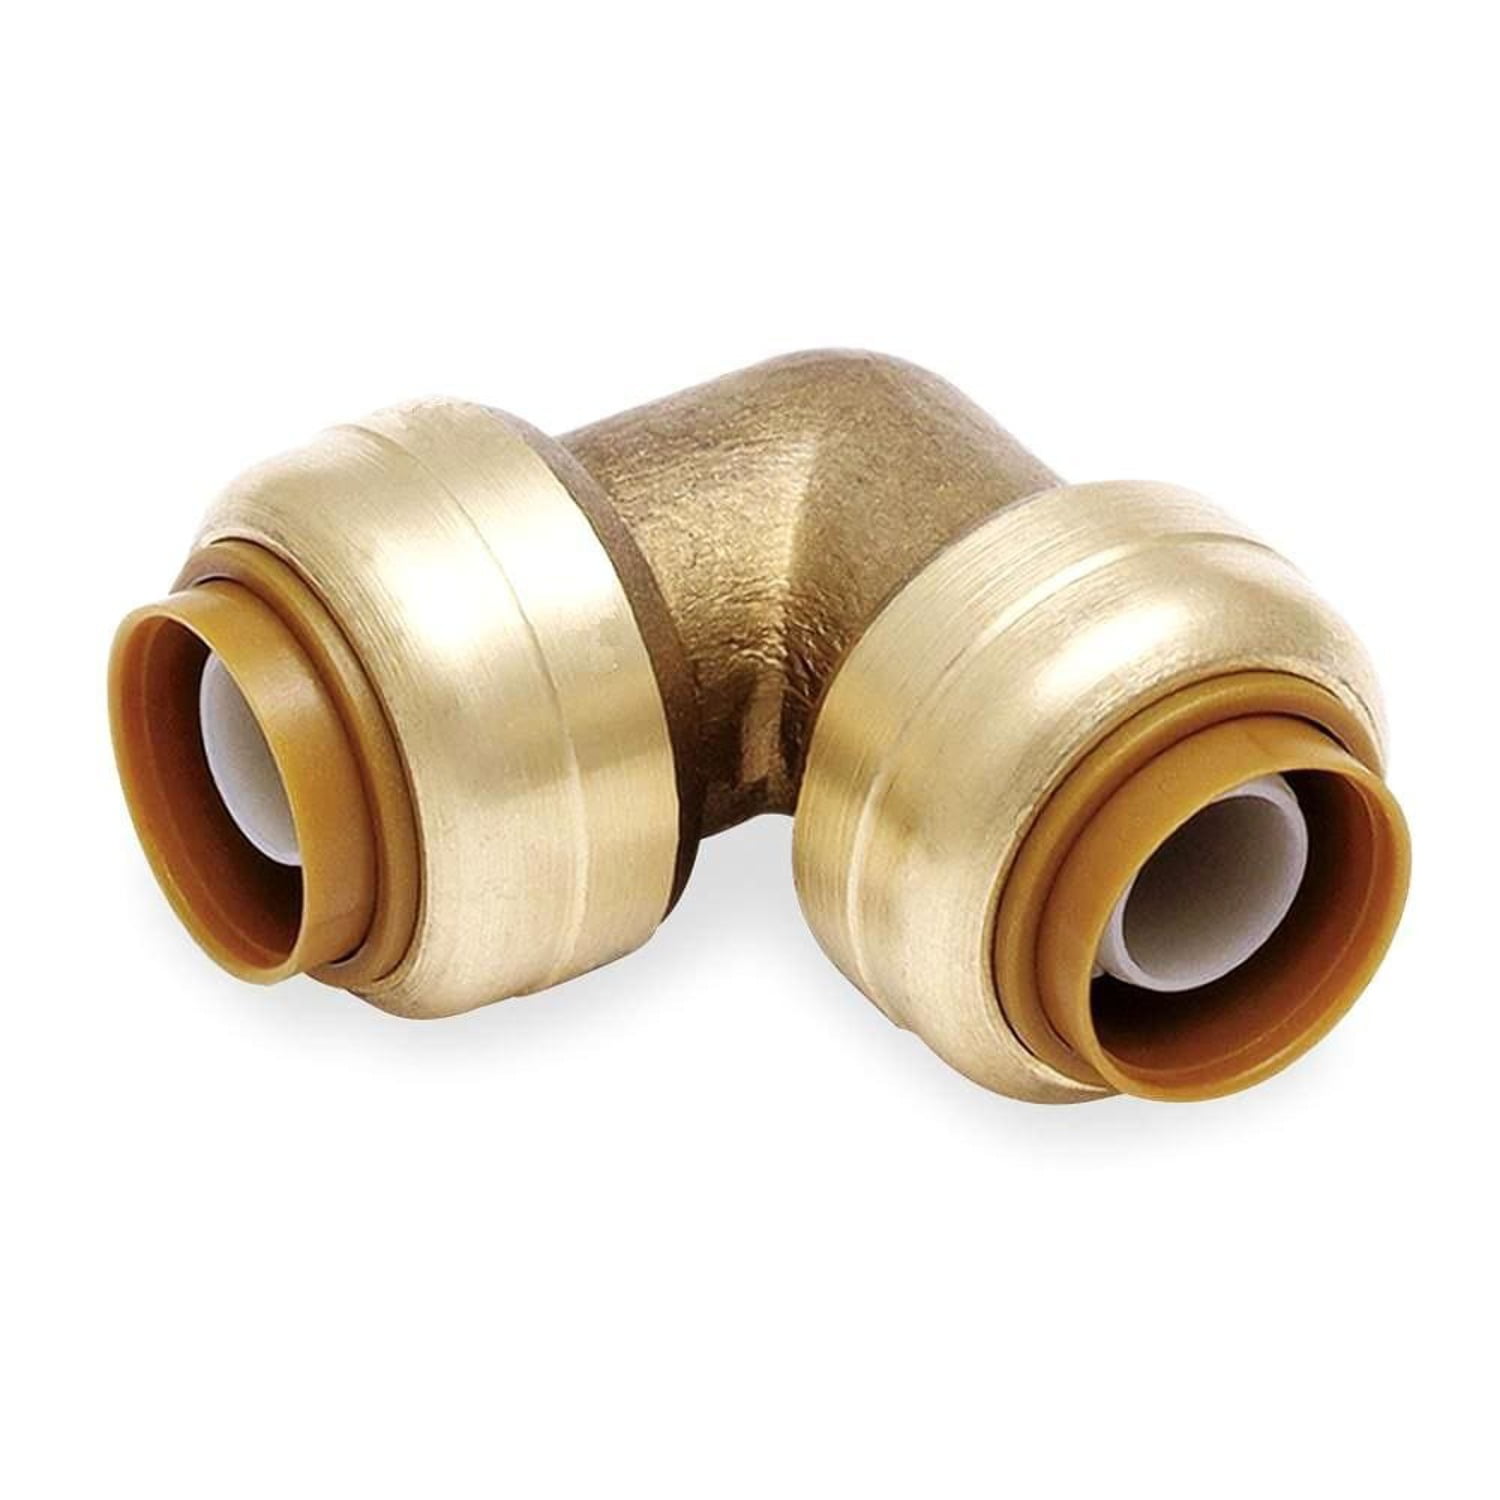 3/4 Inch Push To Connect Fitting 90 Degree Elbow Connector for PEX ...